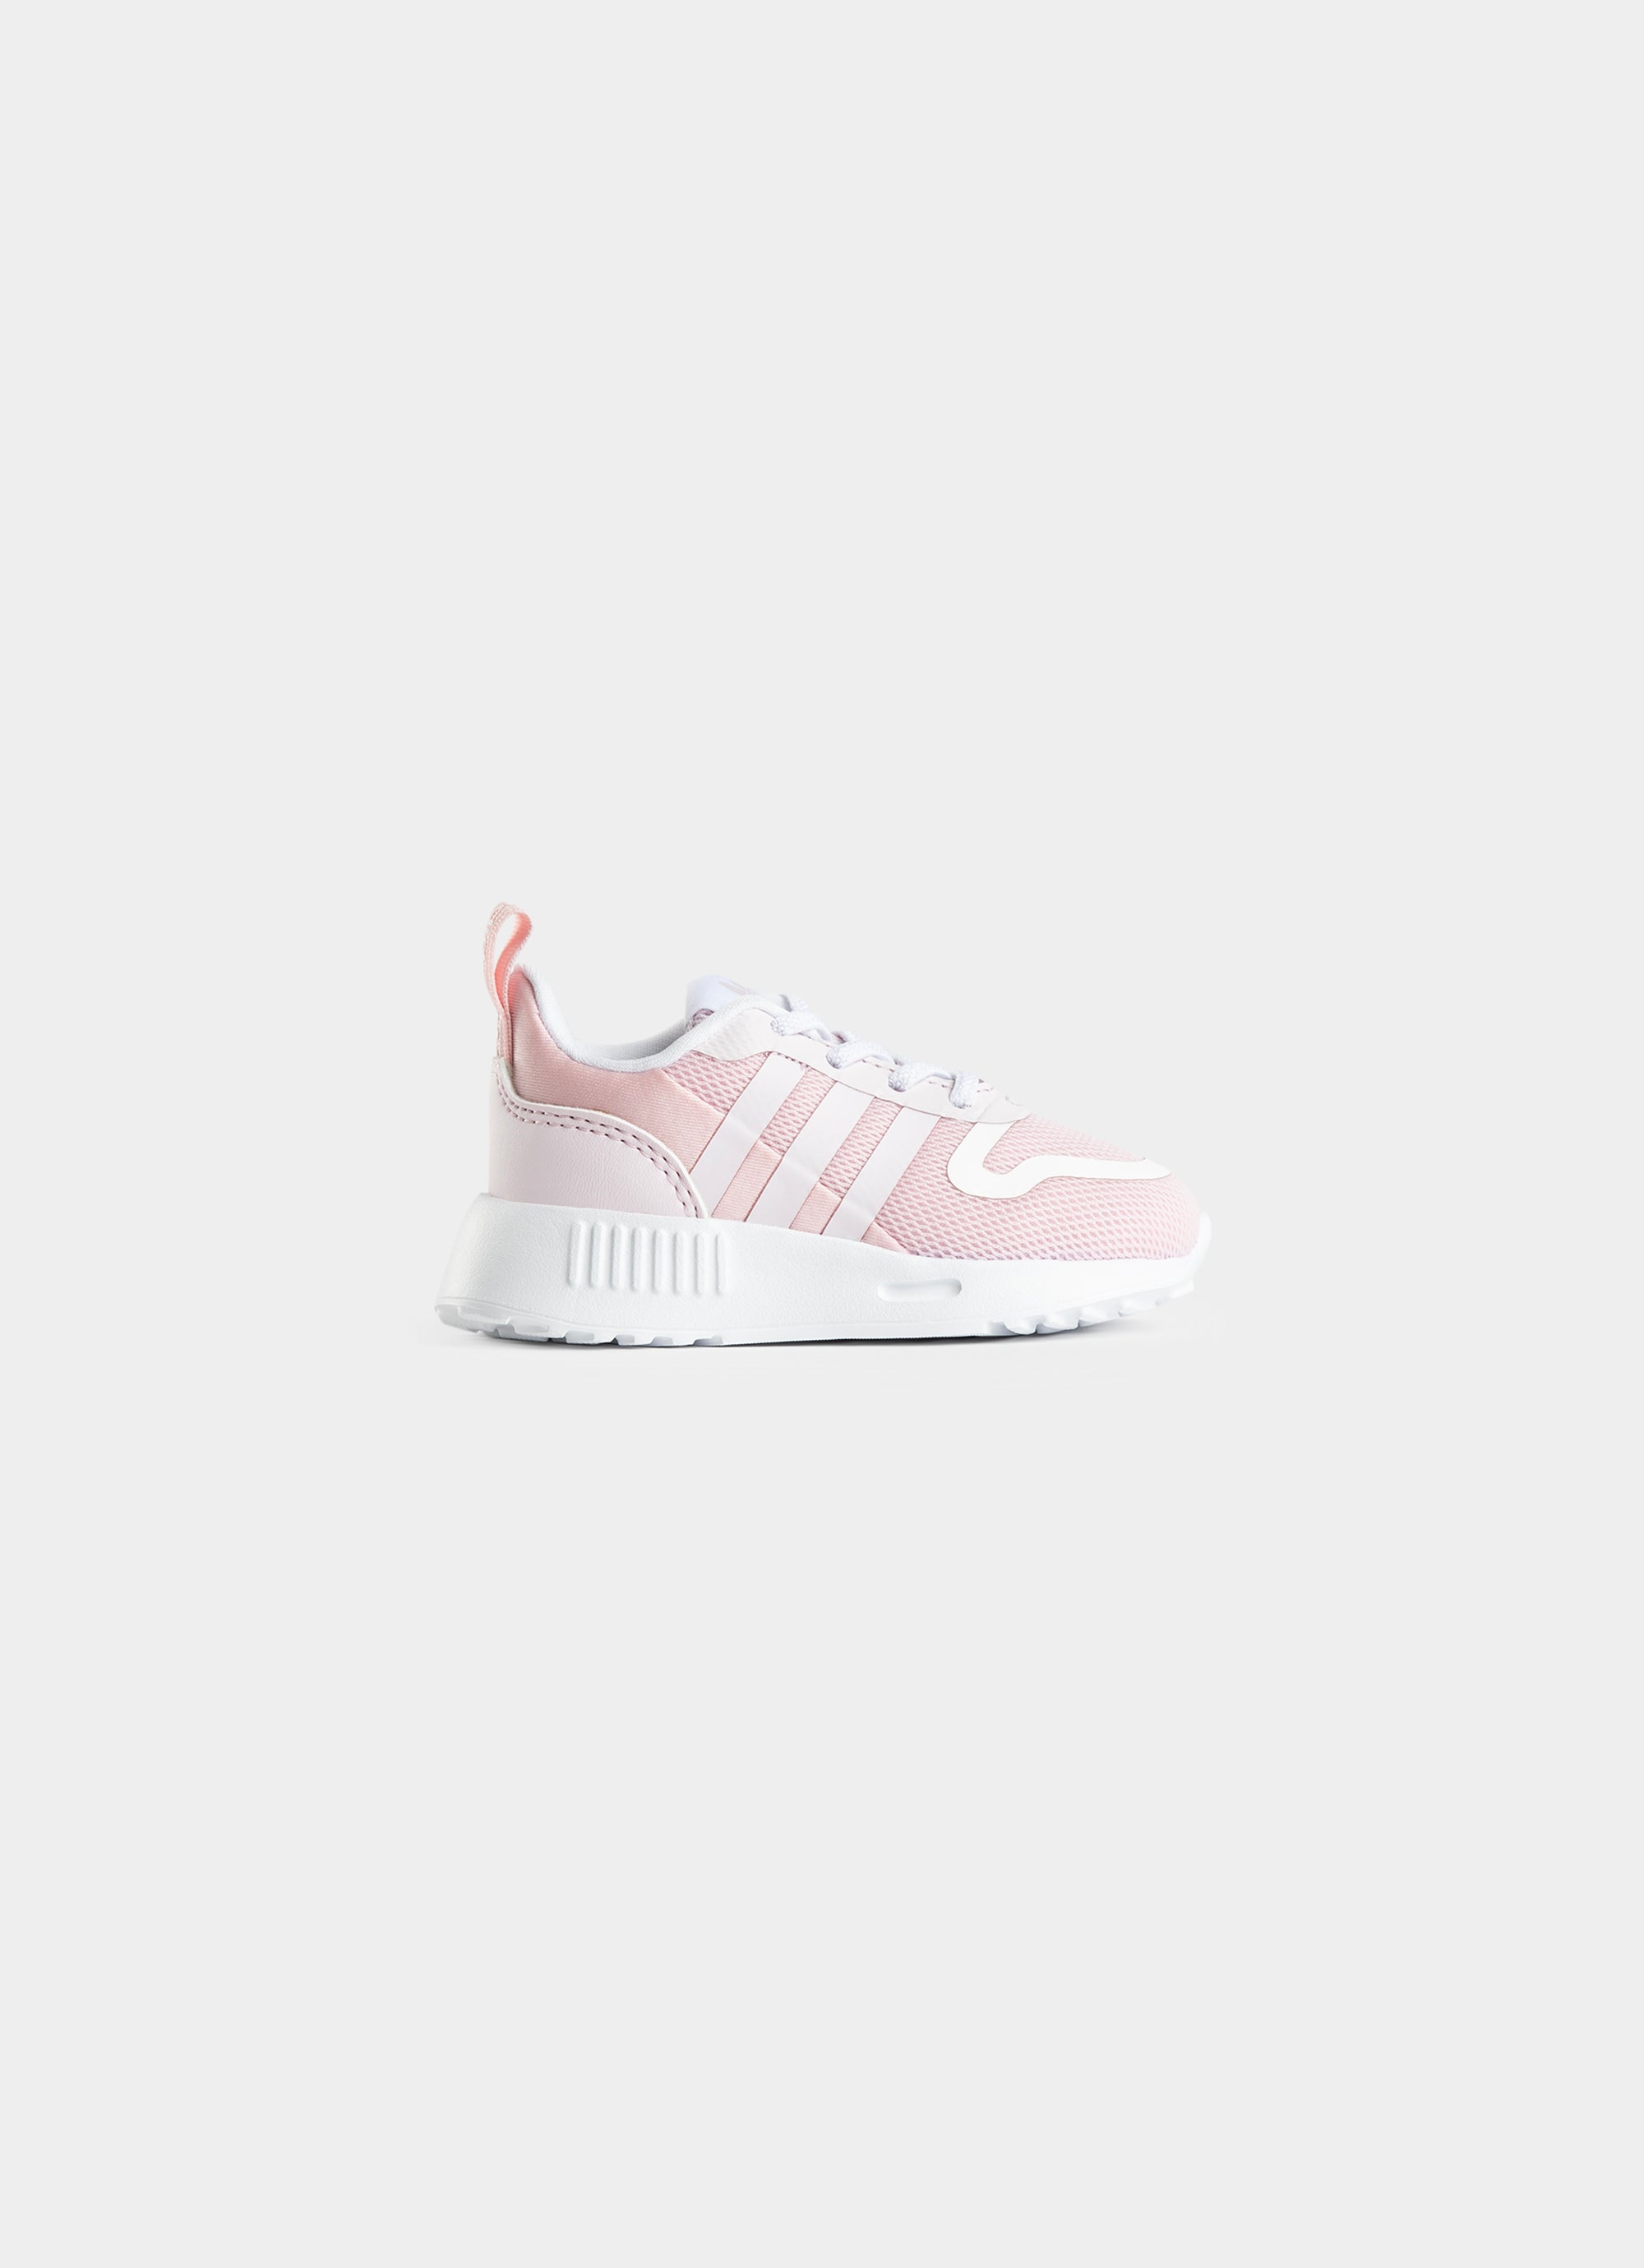 Adidas Sportswear Multix Shoes - Infant in Pink | Red Rat